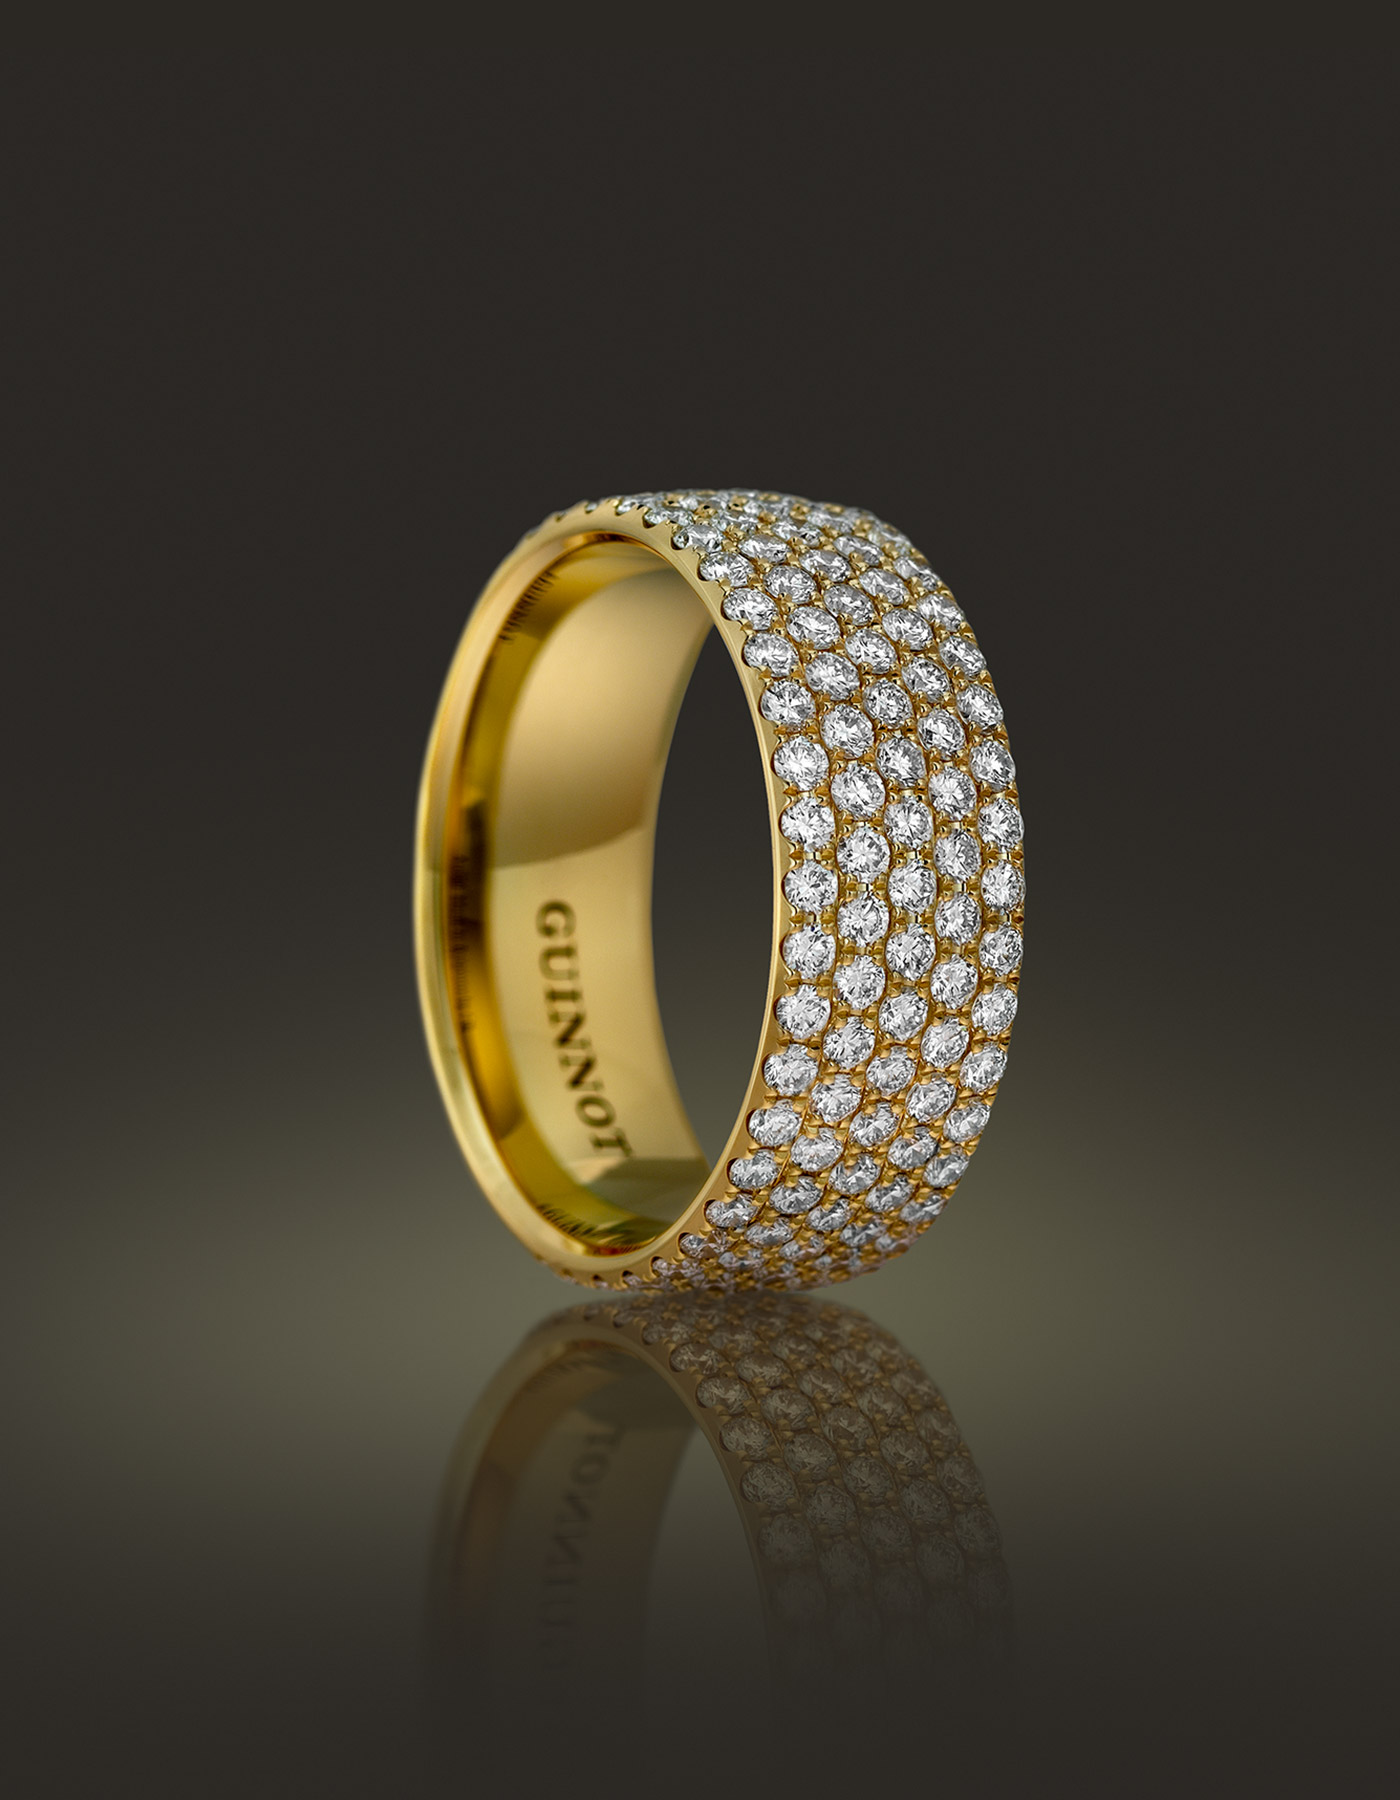 Guinnot Anonymous Five-row micropavé diamond eternity ring in 18k yellow gold